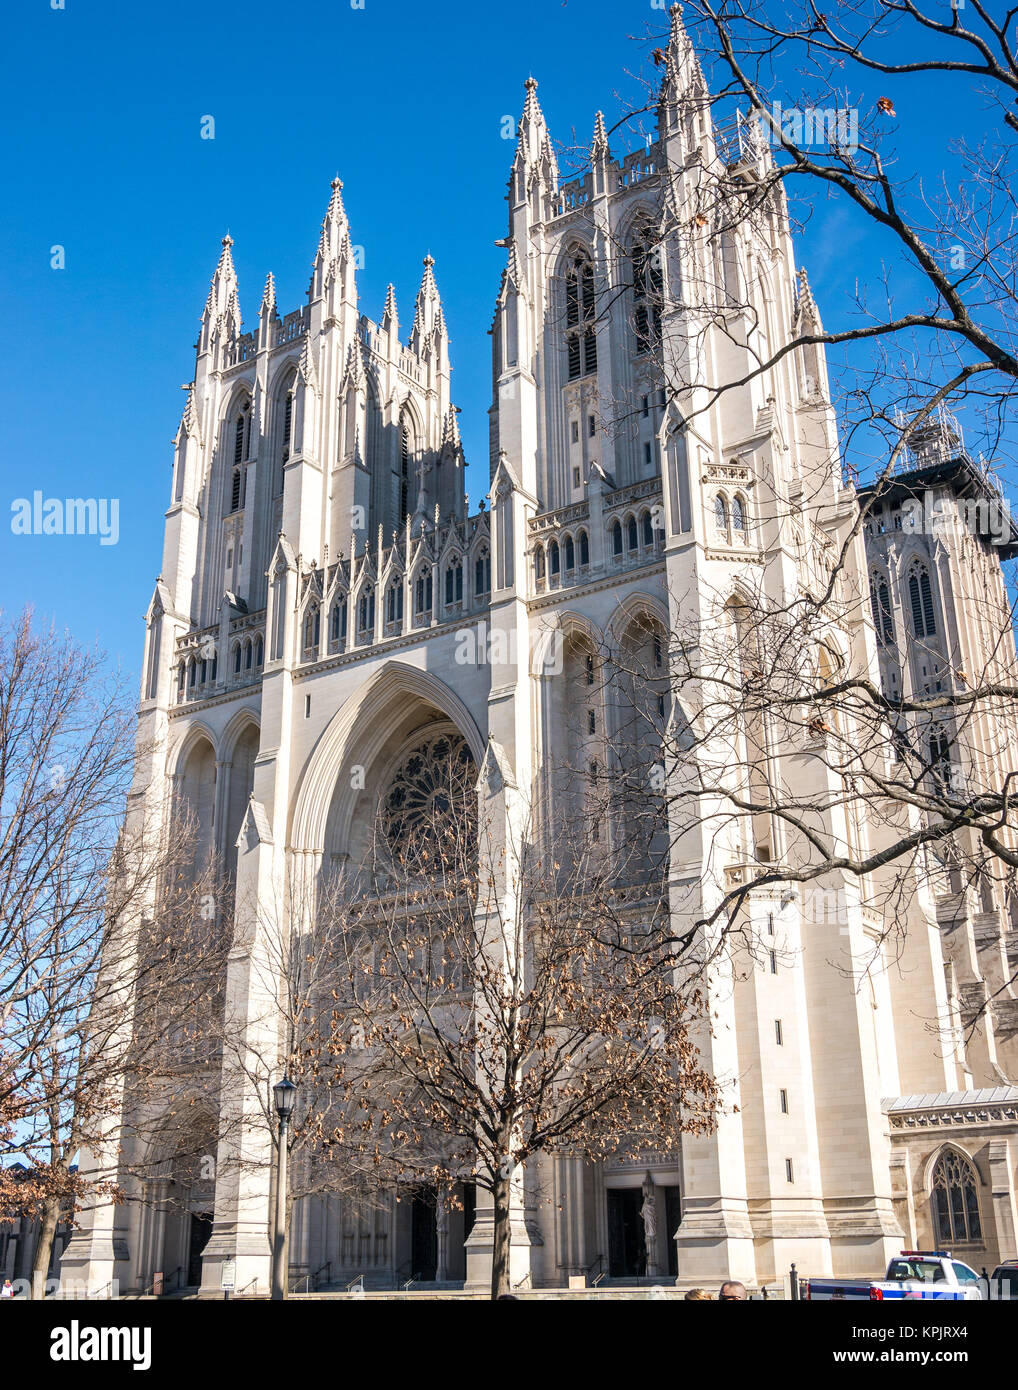 Washington National Cathedral. It is an Episcopal Church located in Washington, D.C Stock Photo